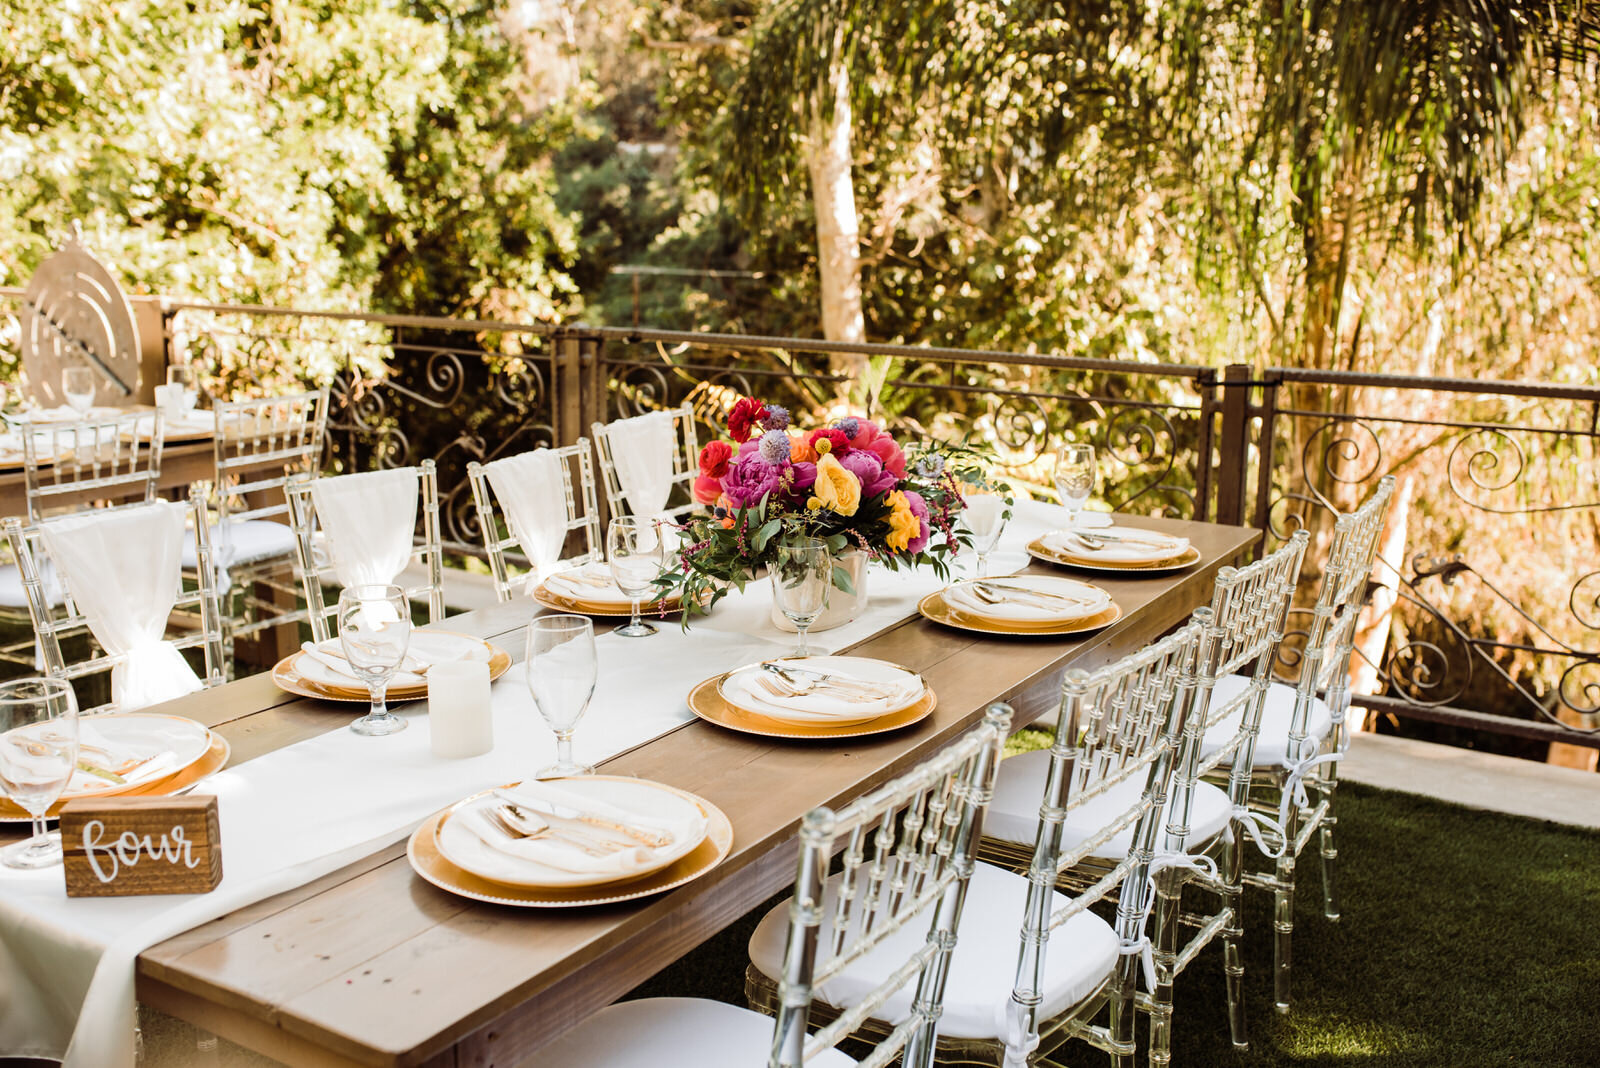 Bright Florals and Gold Place Settings at Houdini Estate Summer Wedding in Los Angeles | | photo by Kept Record | www.keptrecord.com